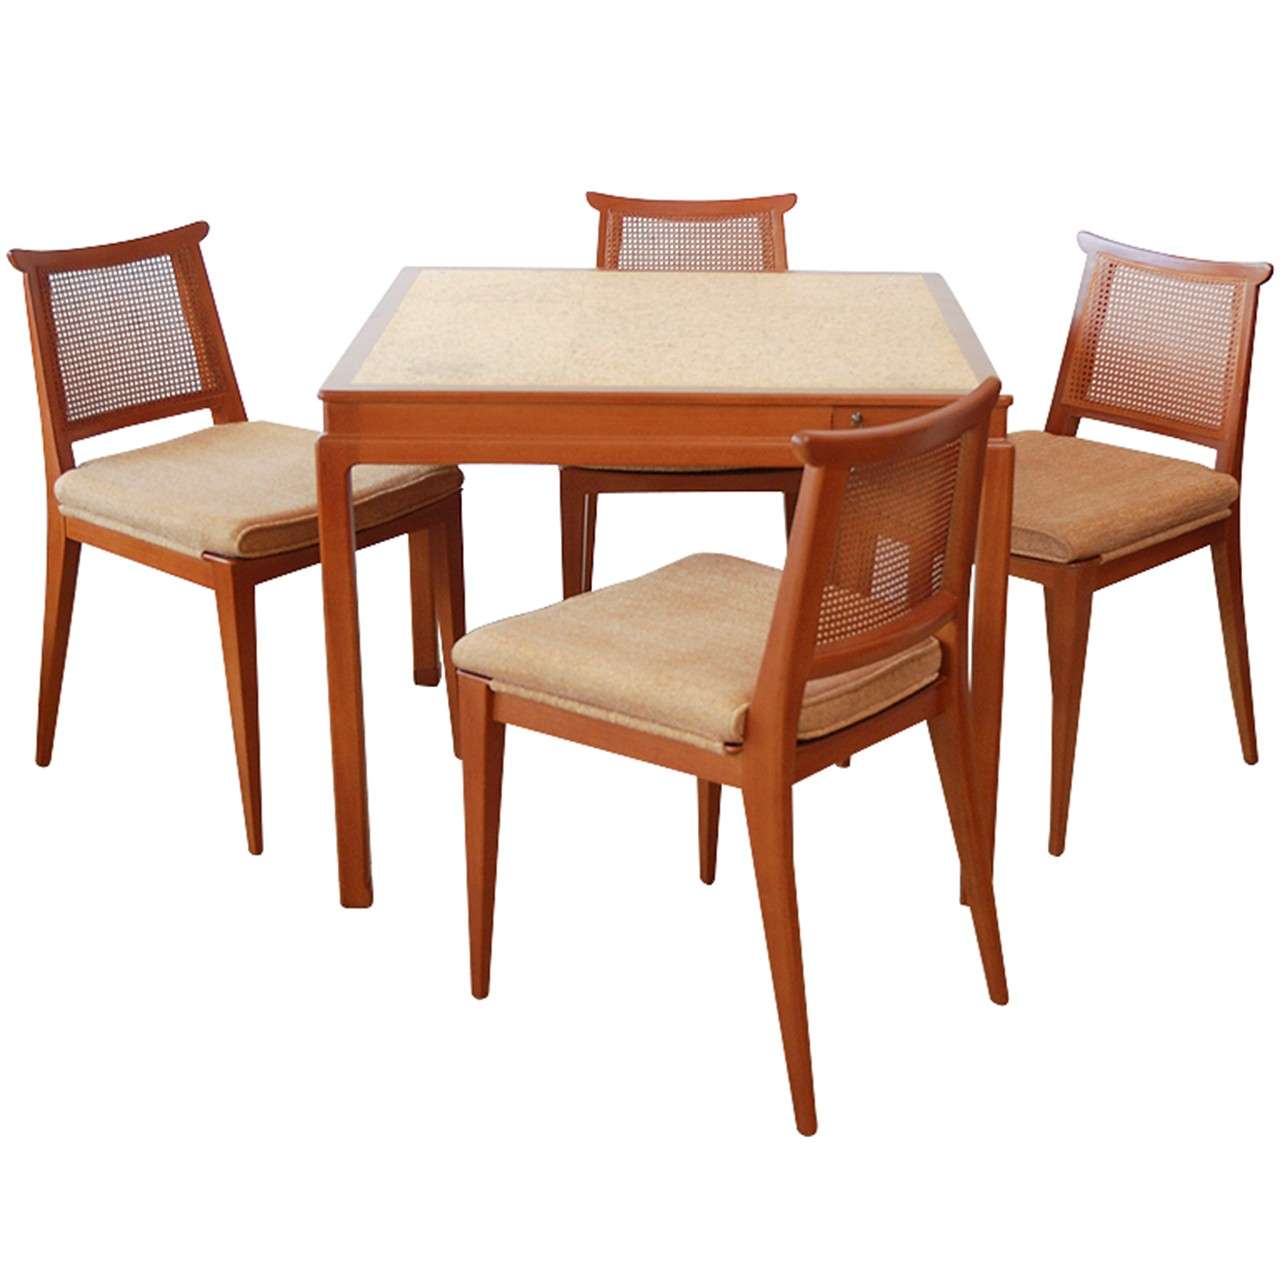 Edward Wormley for Dunbar Games Table and Four Chairs - Newly Reduced Price